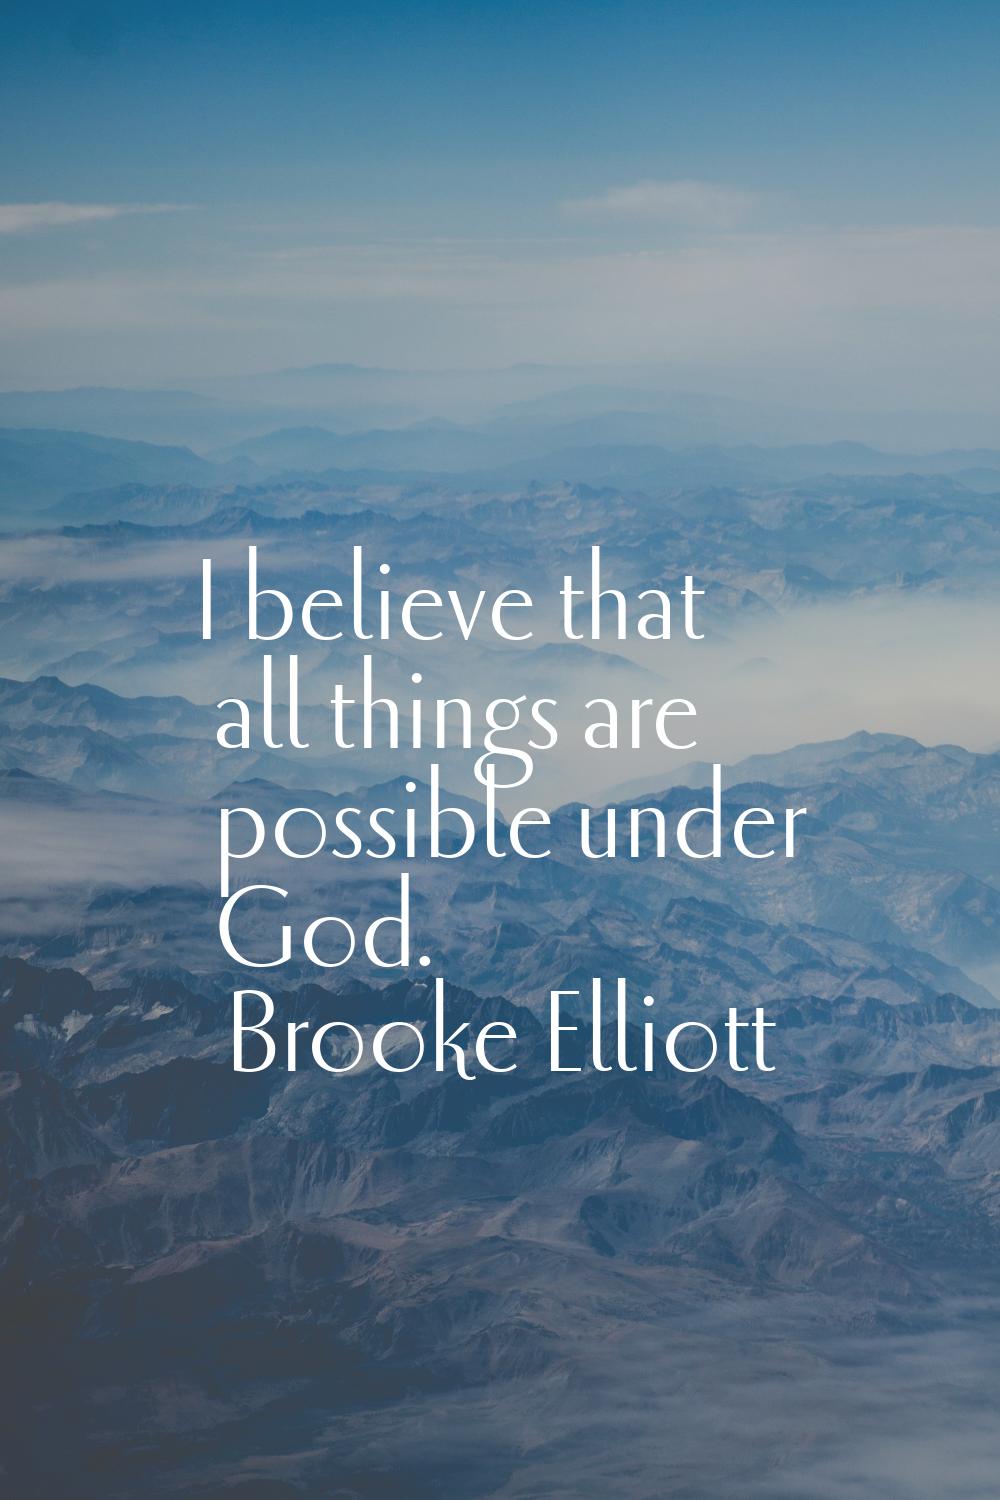 I believe that all things are possible under God.